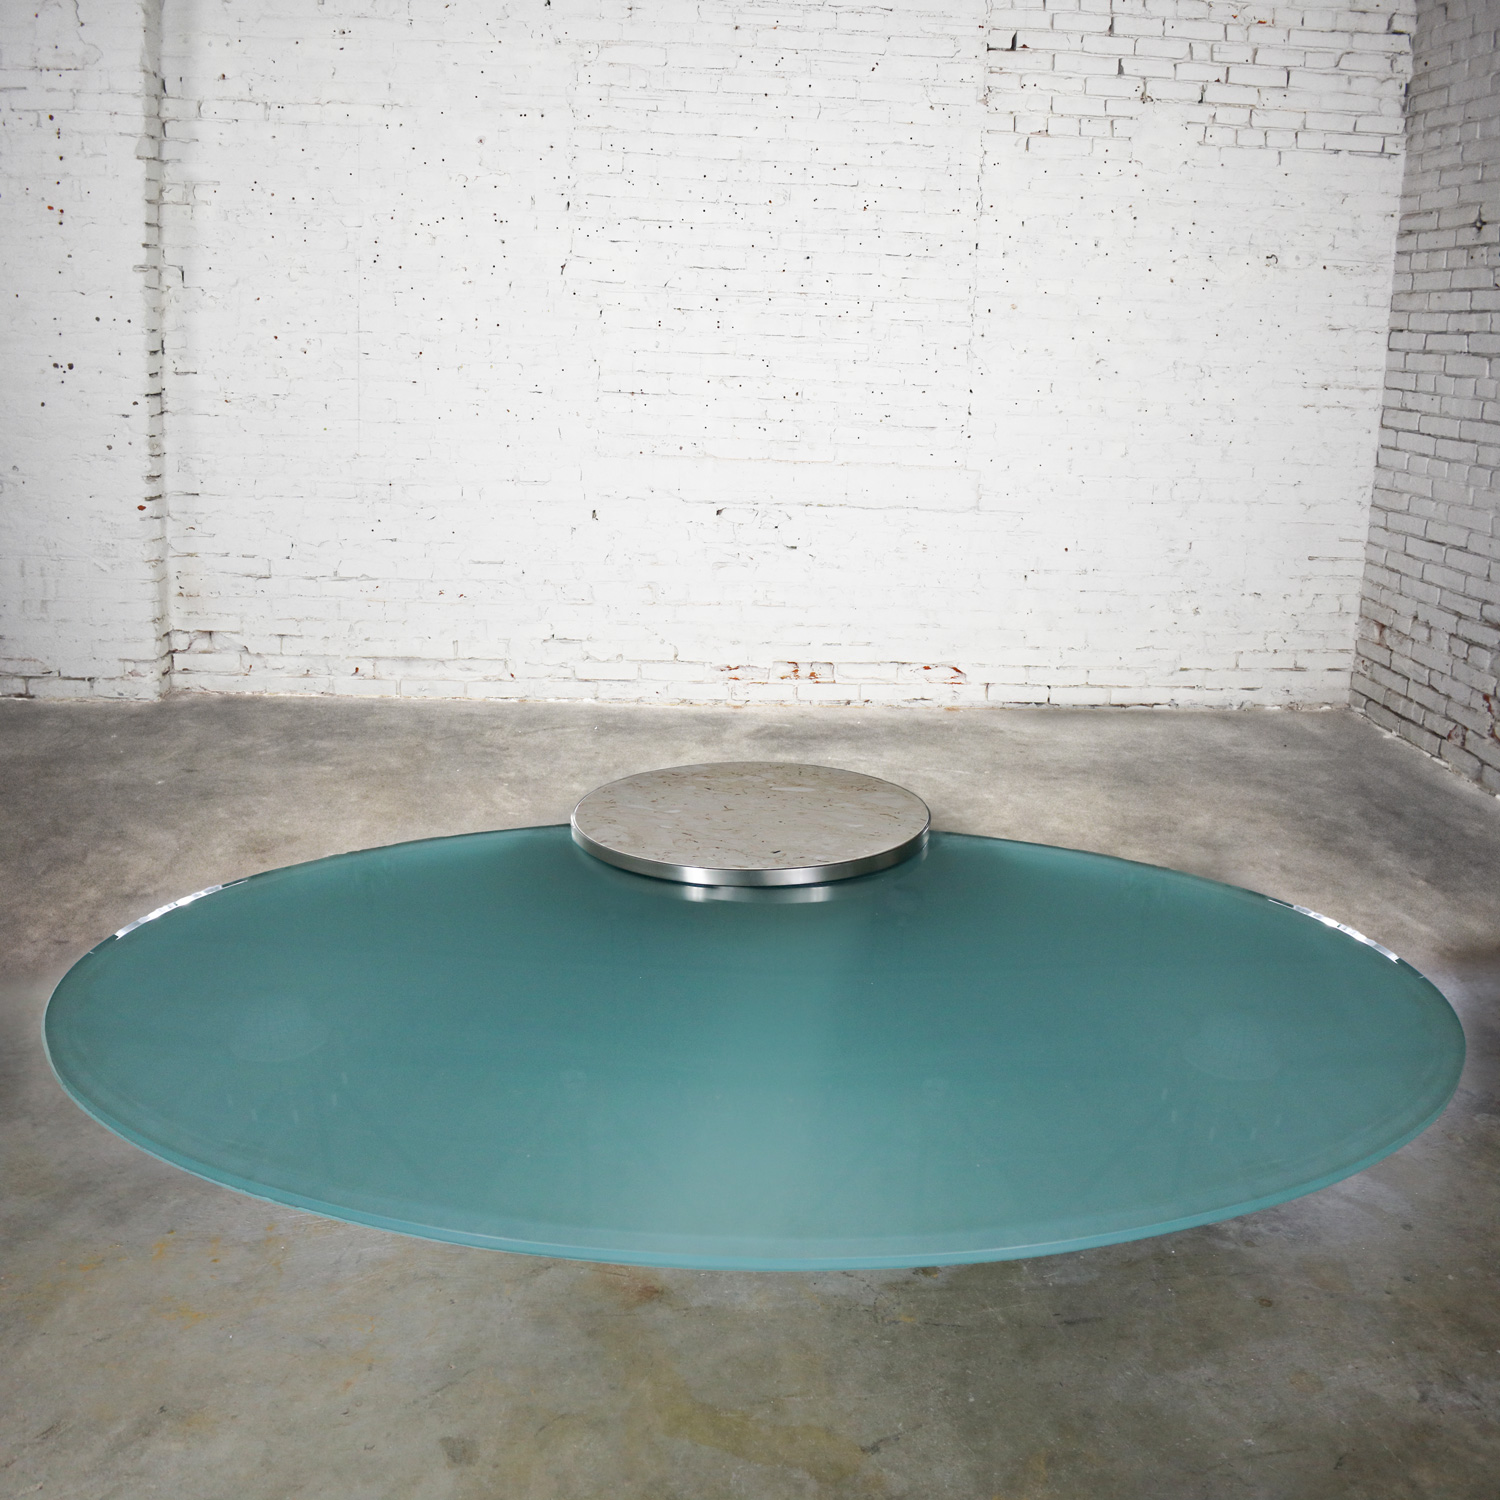 Late 20th-Early 21st Century Modern Hoop Cantilevered Low Cocktail or Coffee Table by J. Wade Beam for Brueton